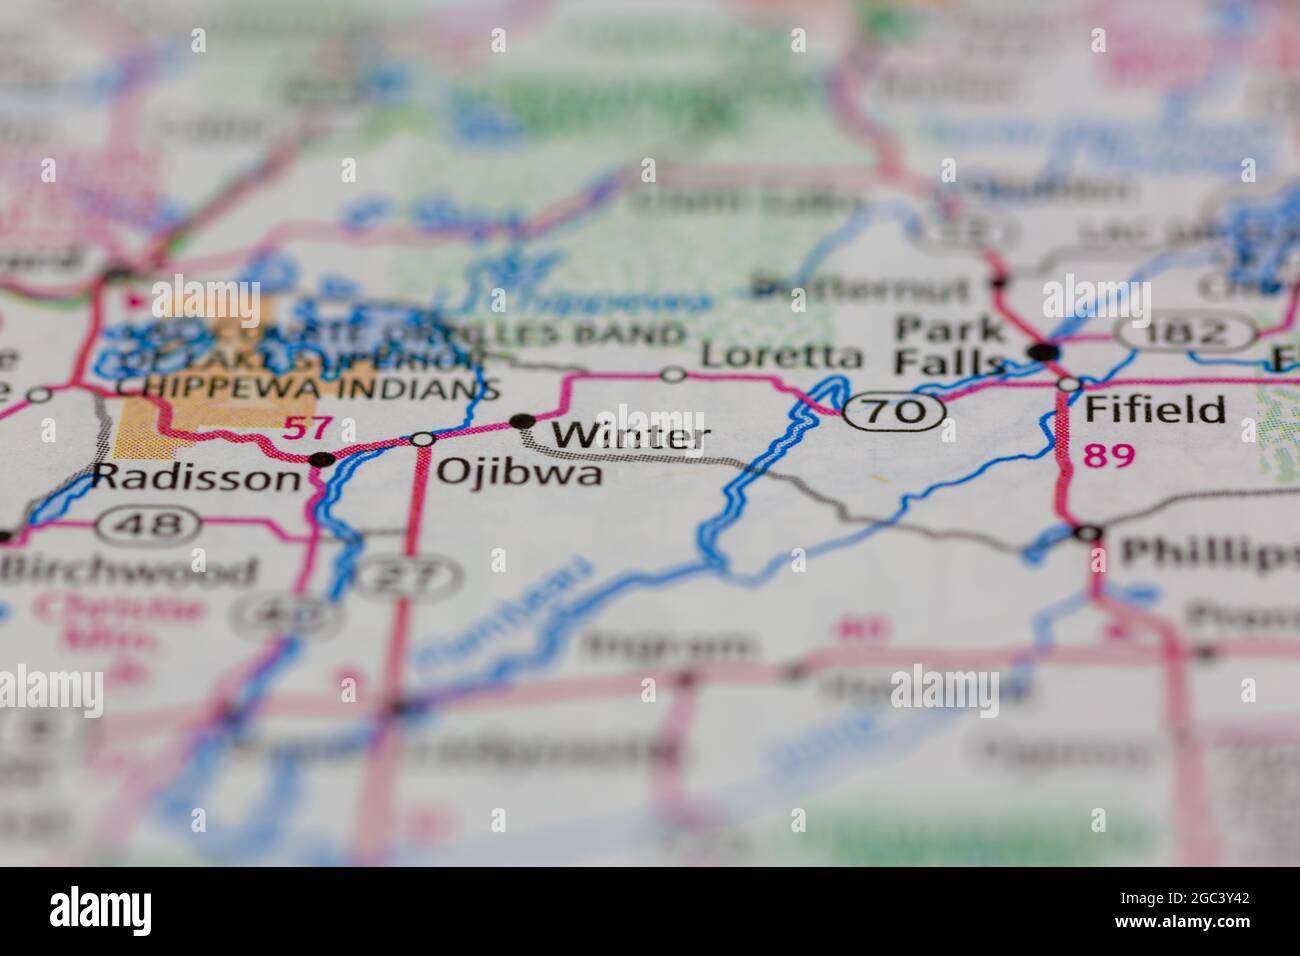 Winter Wisconsin USA shown on a road map or Geography map Stock Photo